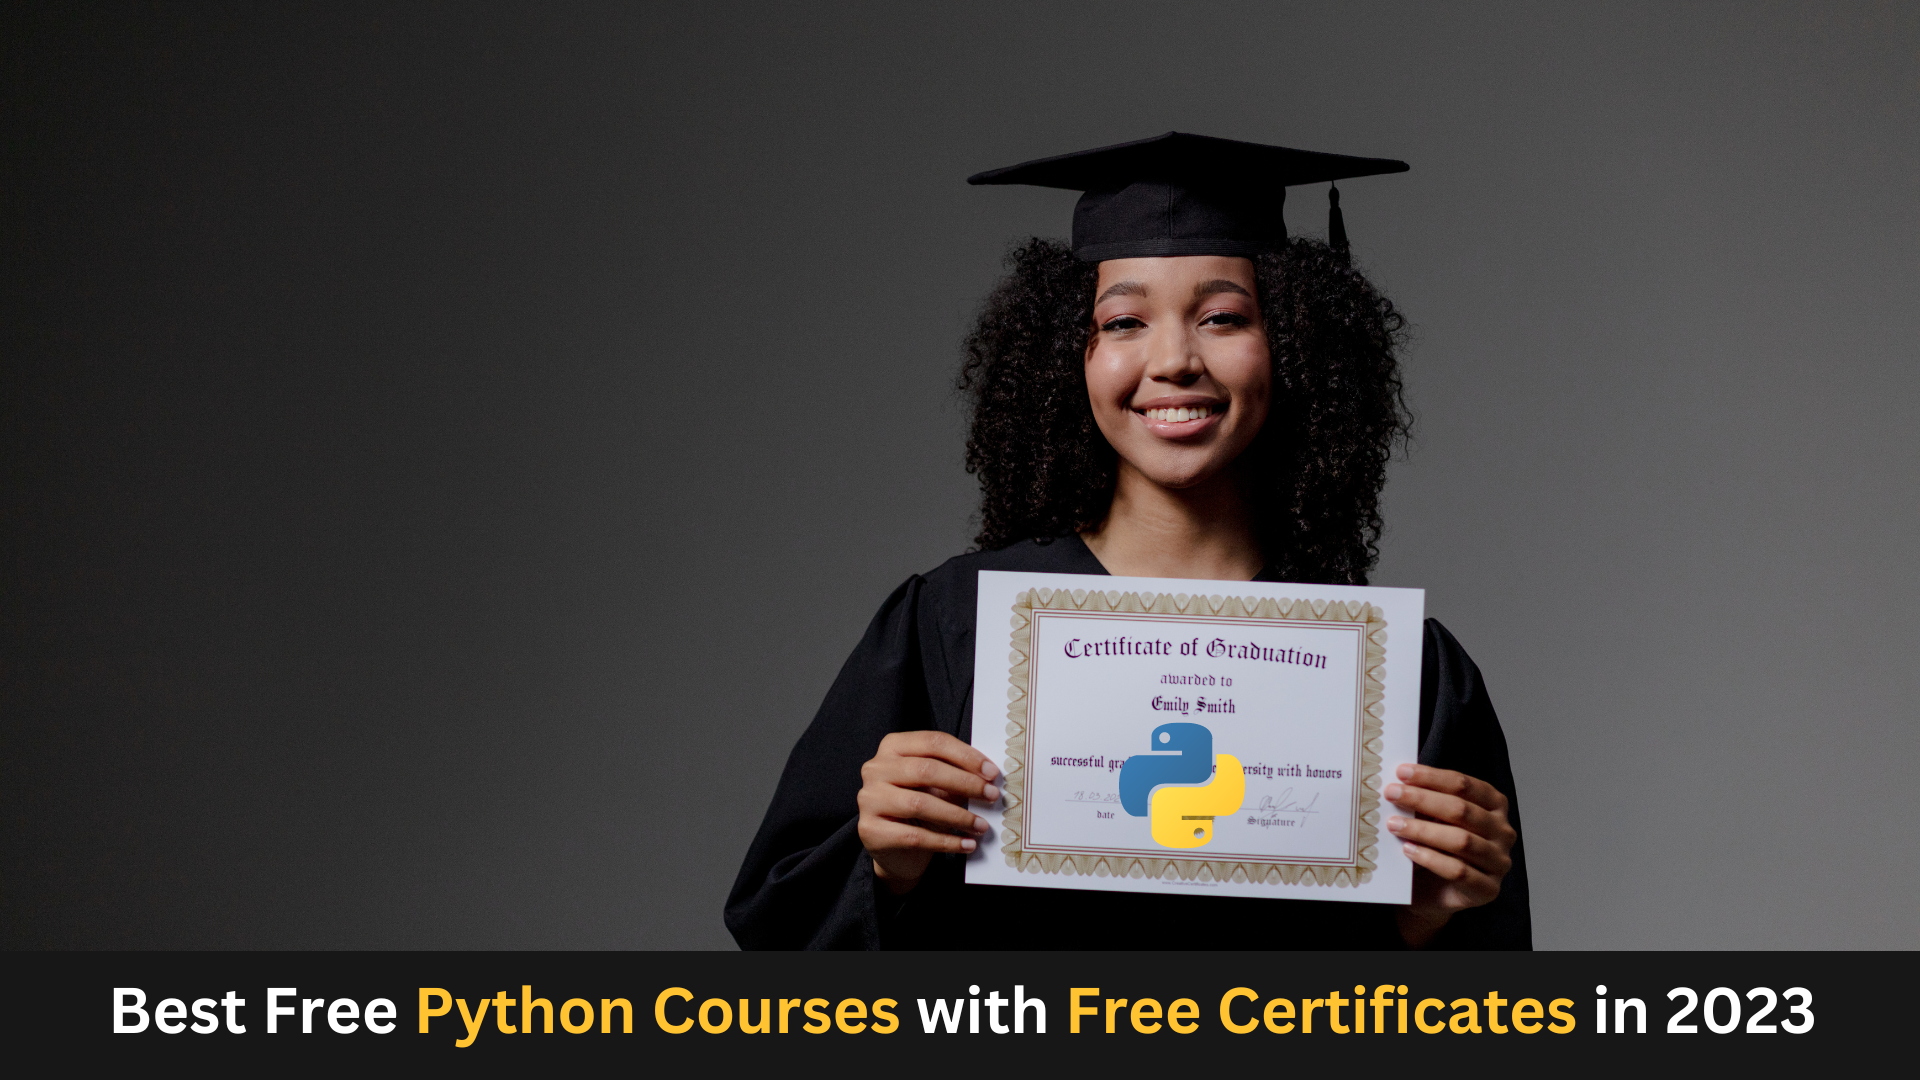 The Best Free Python Courses with Free Certificates in 2023